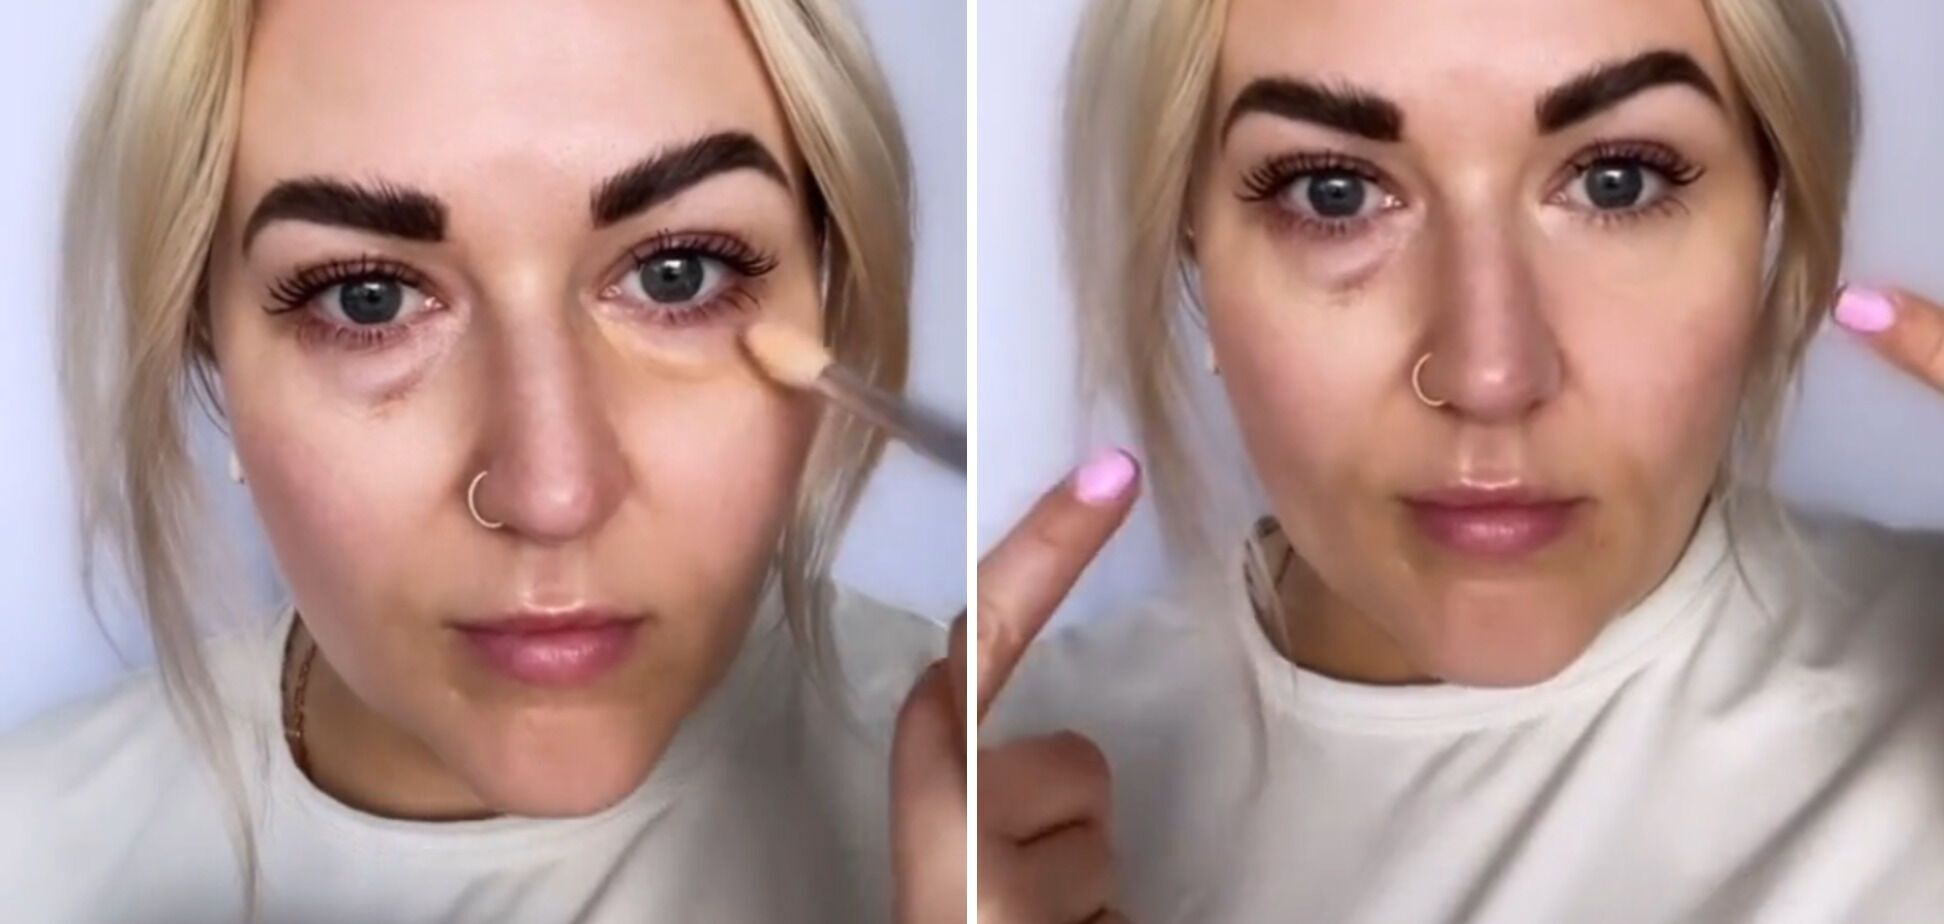 How to remove dark circles under the eyes: a simple concealer trick that works even for men